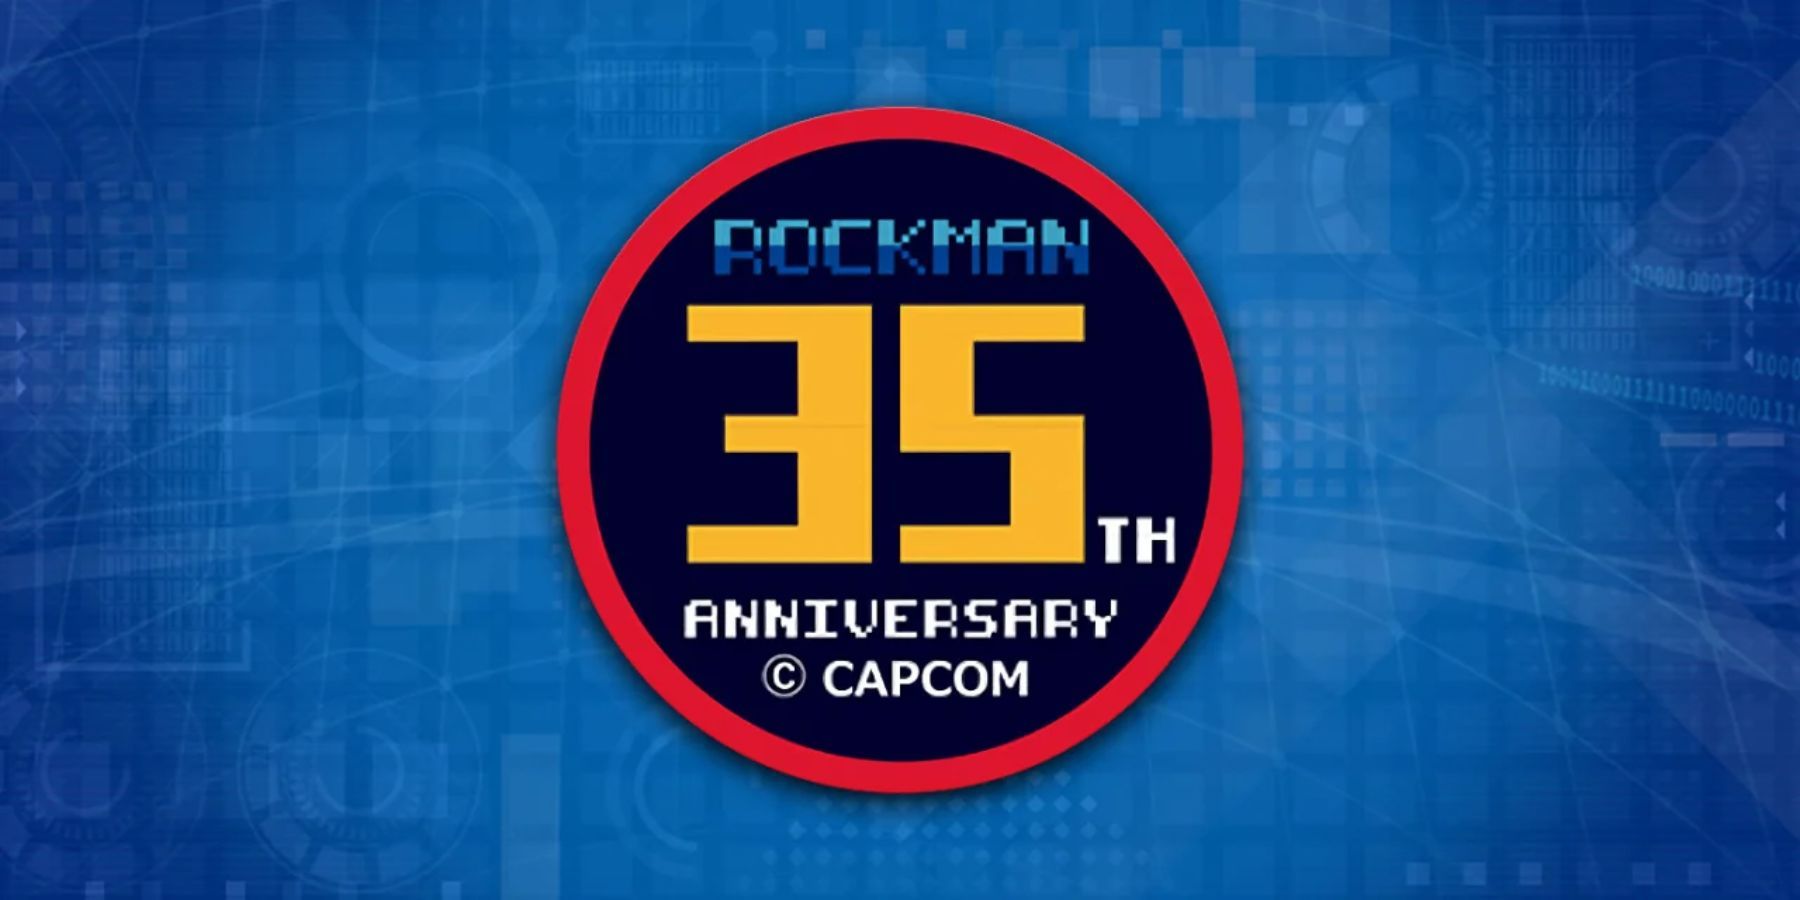 Mega Man’s 35th Anniversary Shouldn’t Pass Without a New
Game Announcement